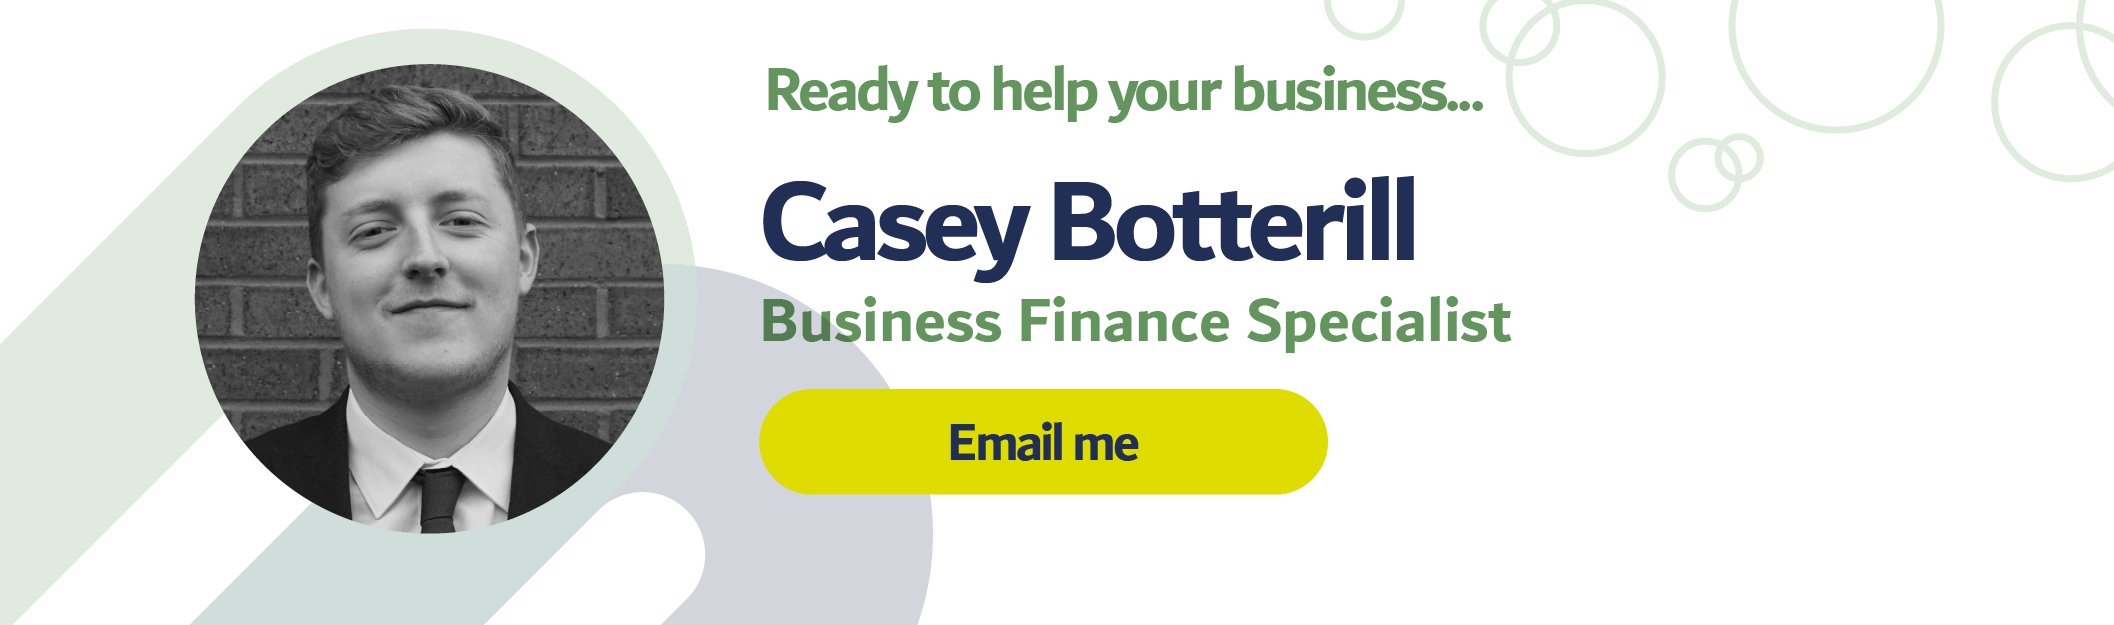 Casey Botterill from Millbrook Business Finance - Get in Touch